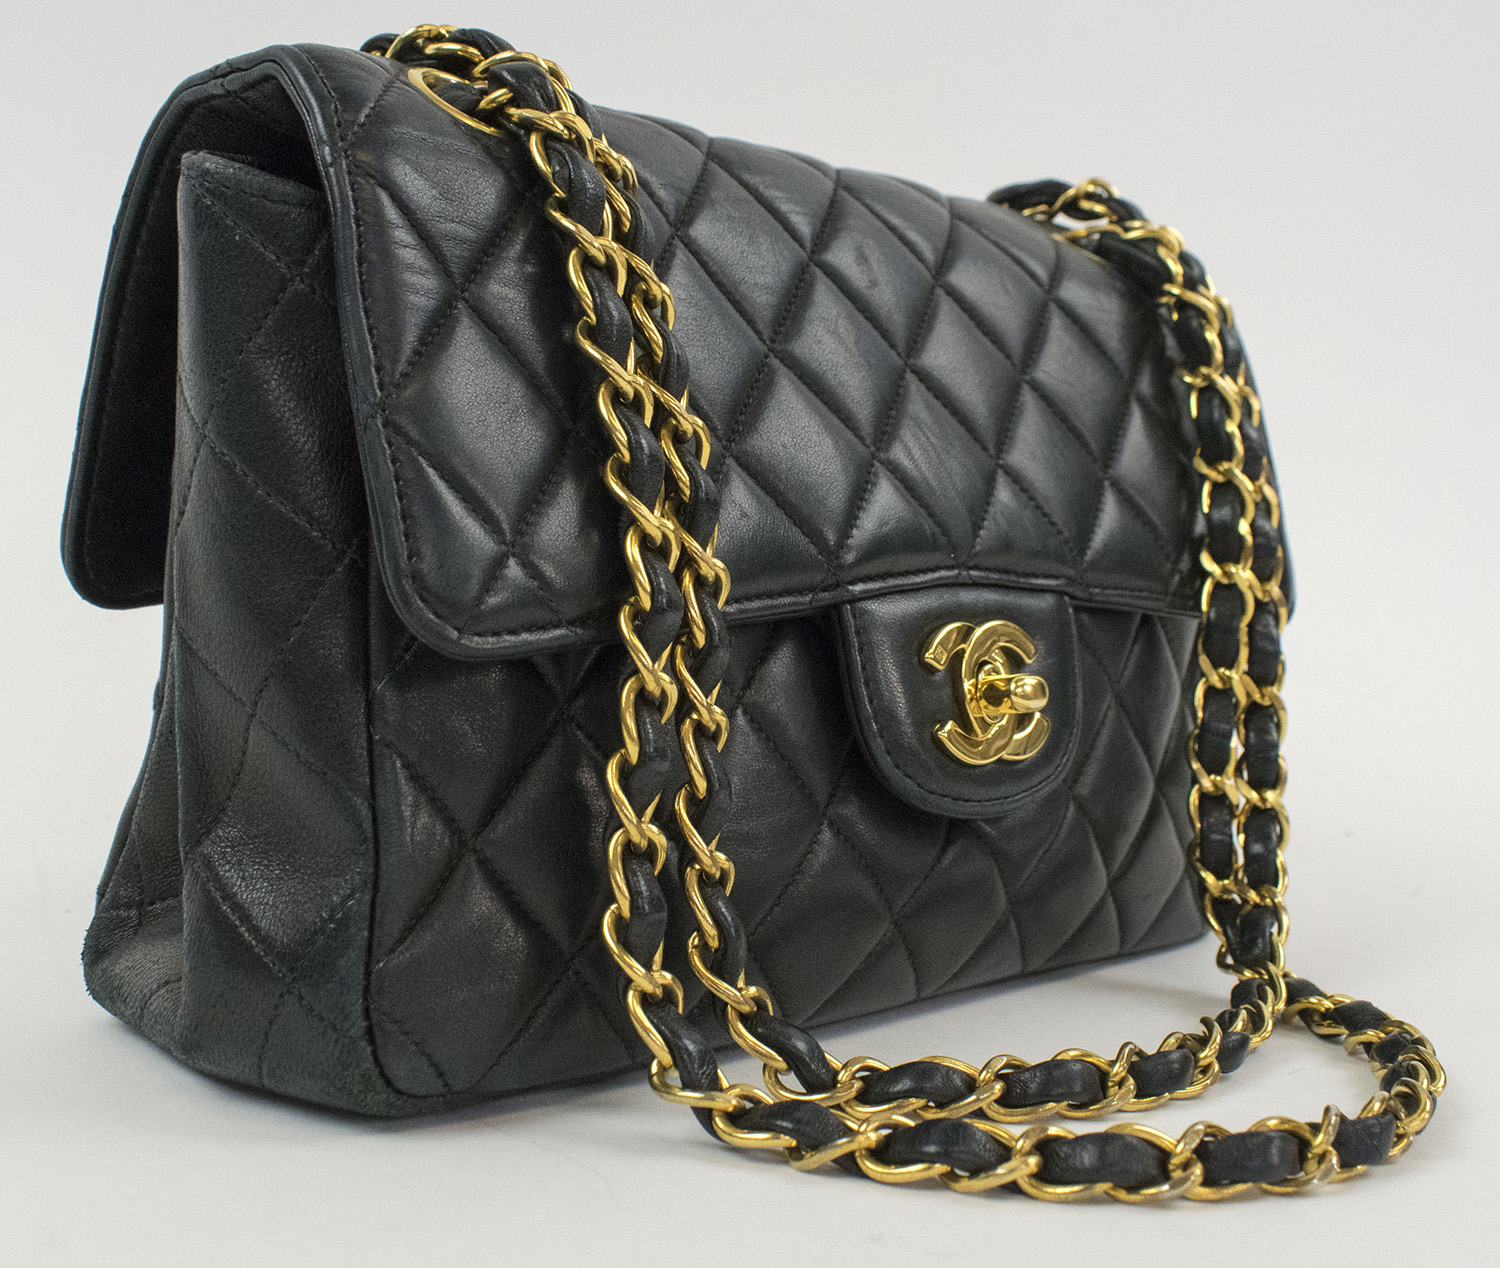 CHANEL DOUBLE SIDED CLASSIC FLAP HANDBAG, black quilted leather